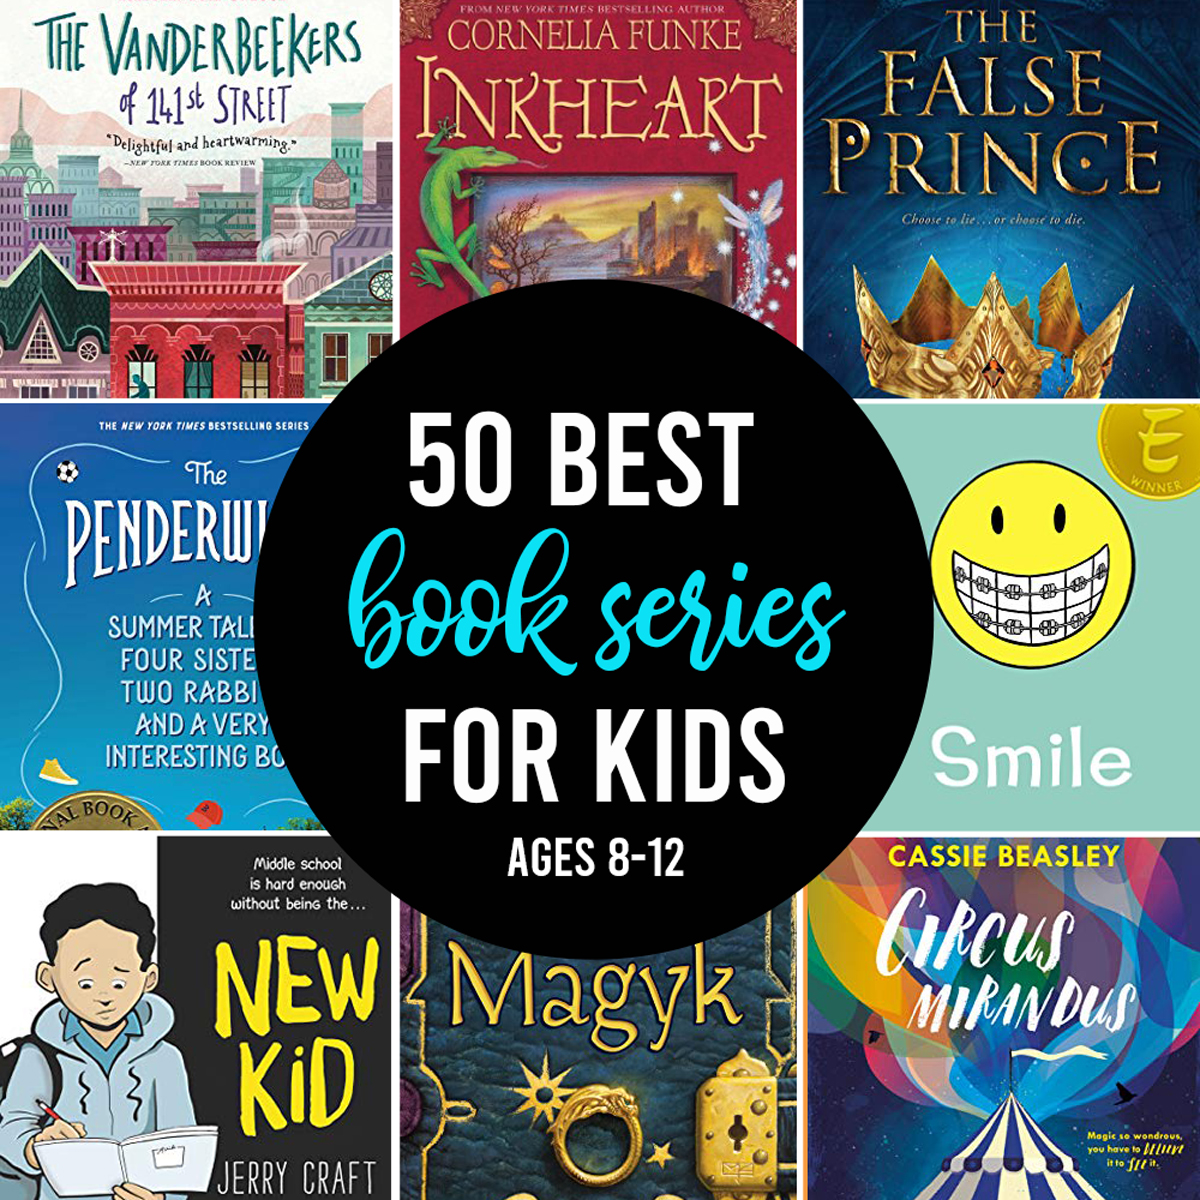 This School Year's Bestselling Books for Grades 9-12